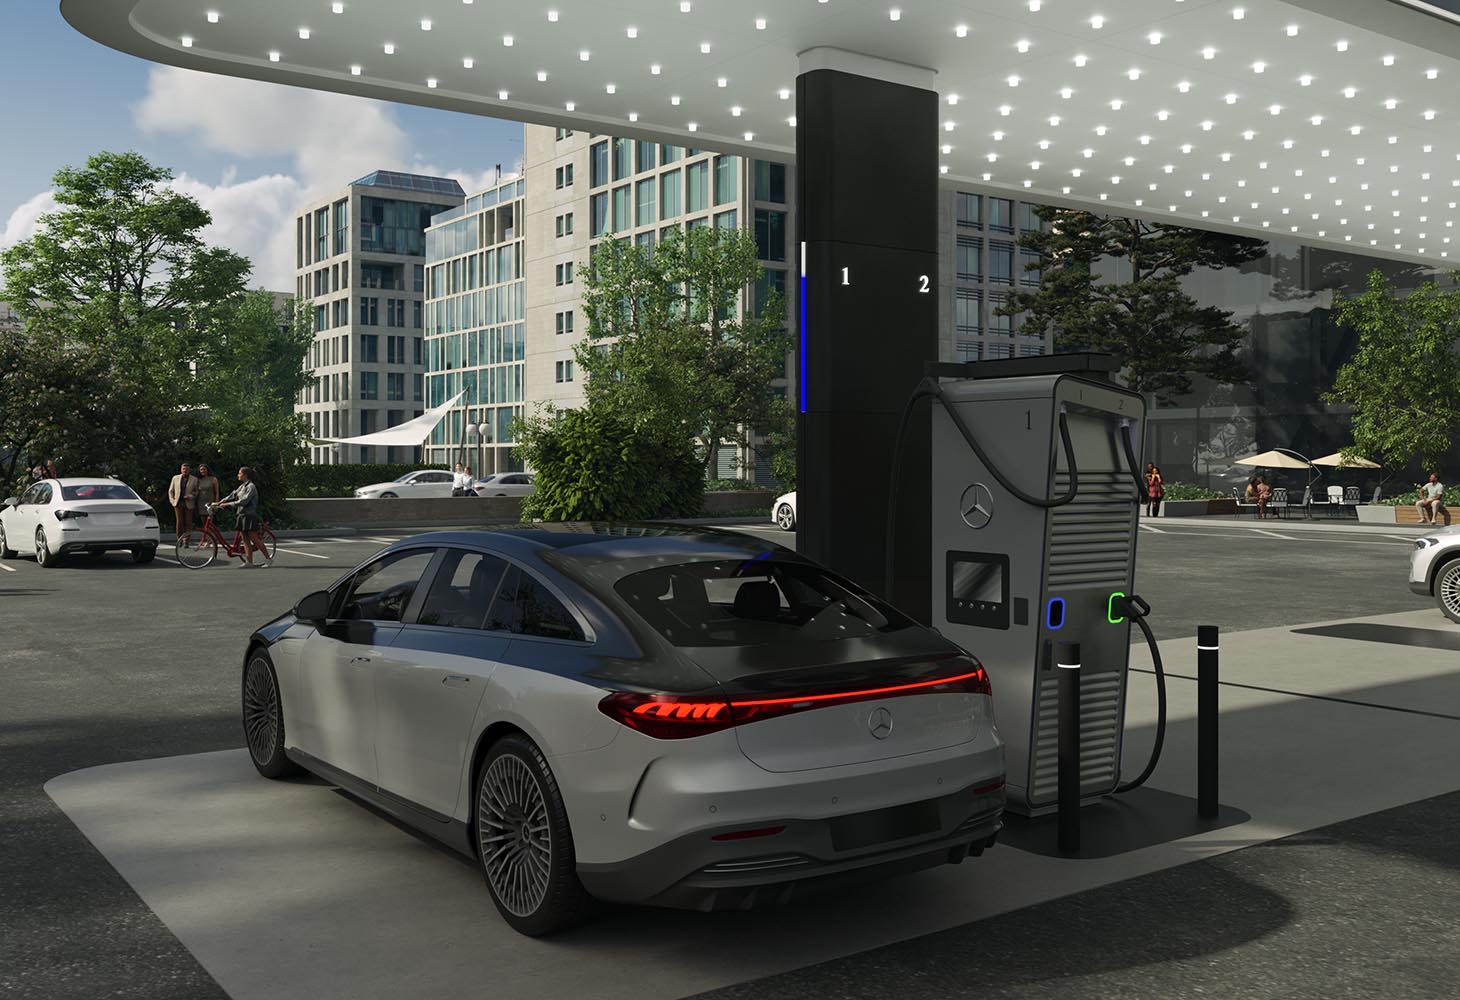 Mercedes-Benz expands global charging infrastructure